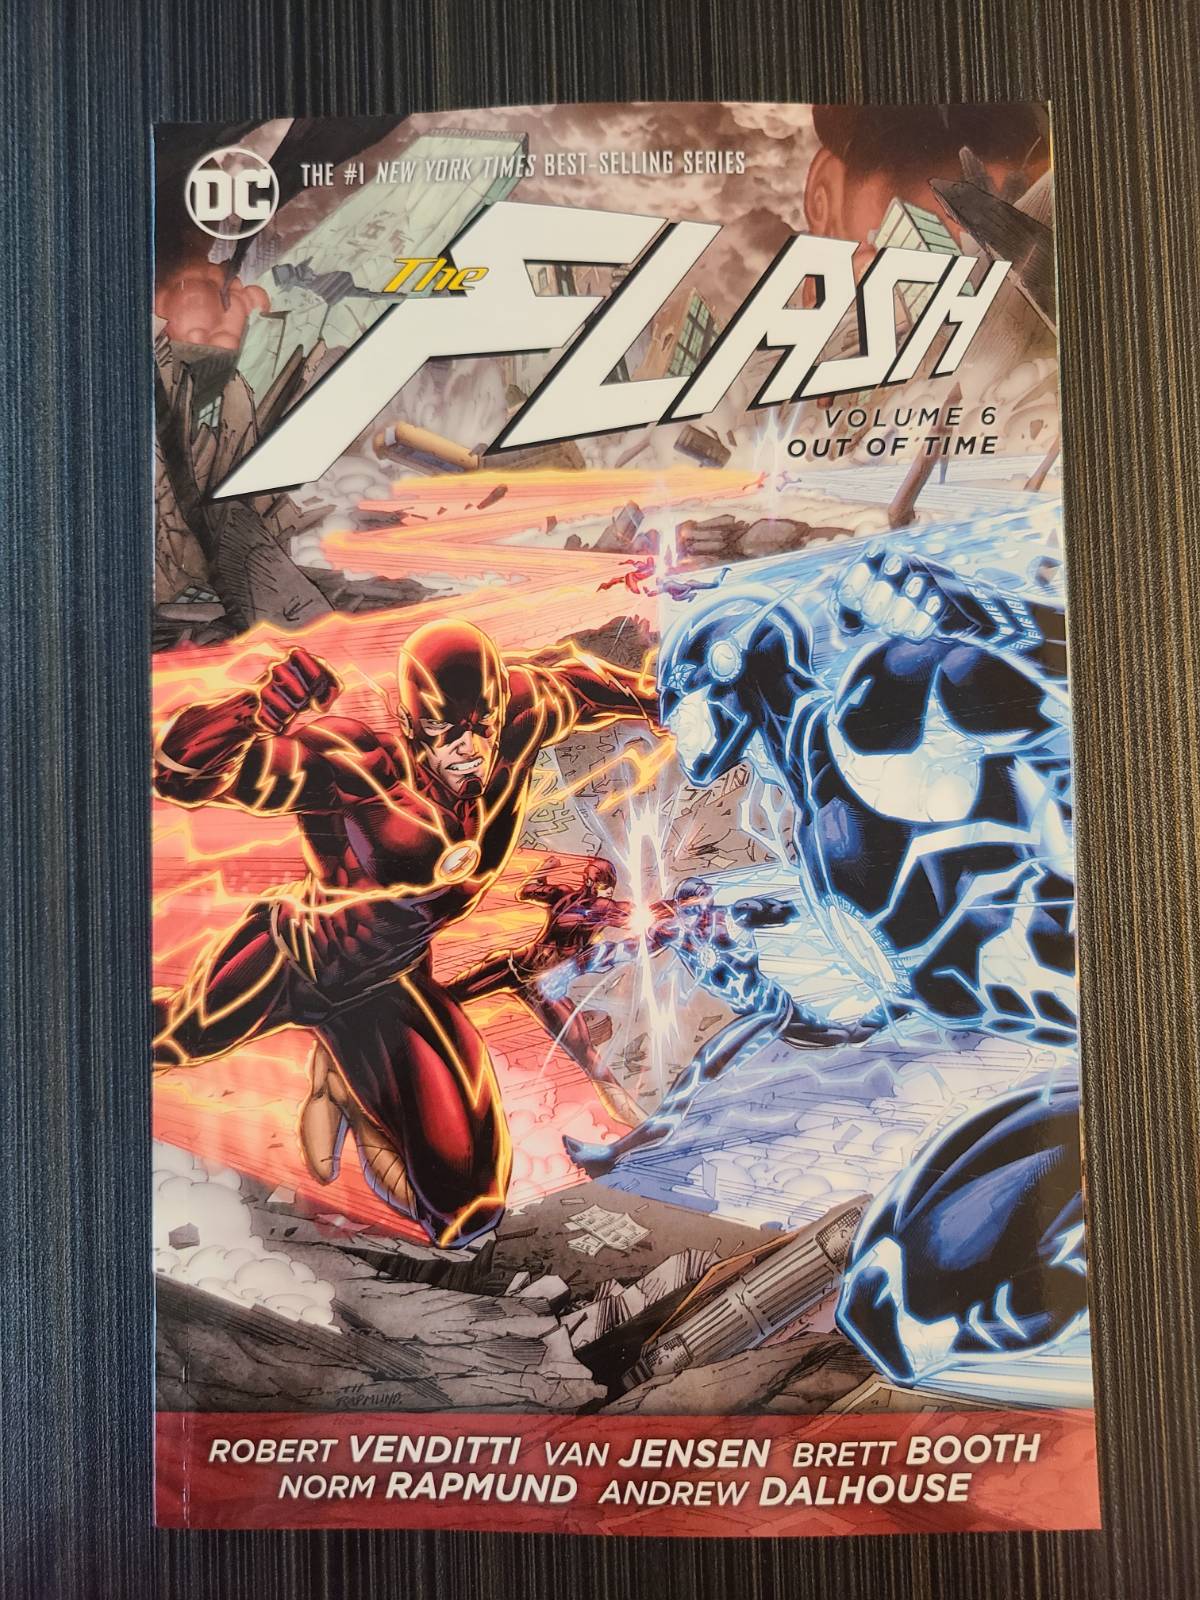 Flash Vol 06 Out of Time trade paperback comic book